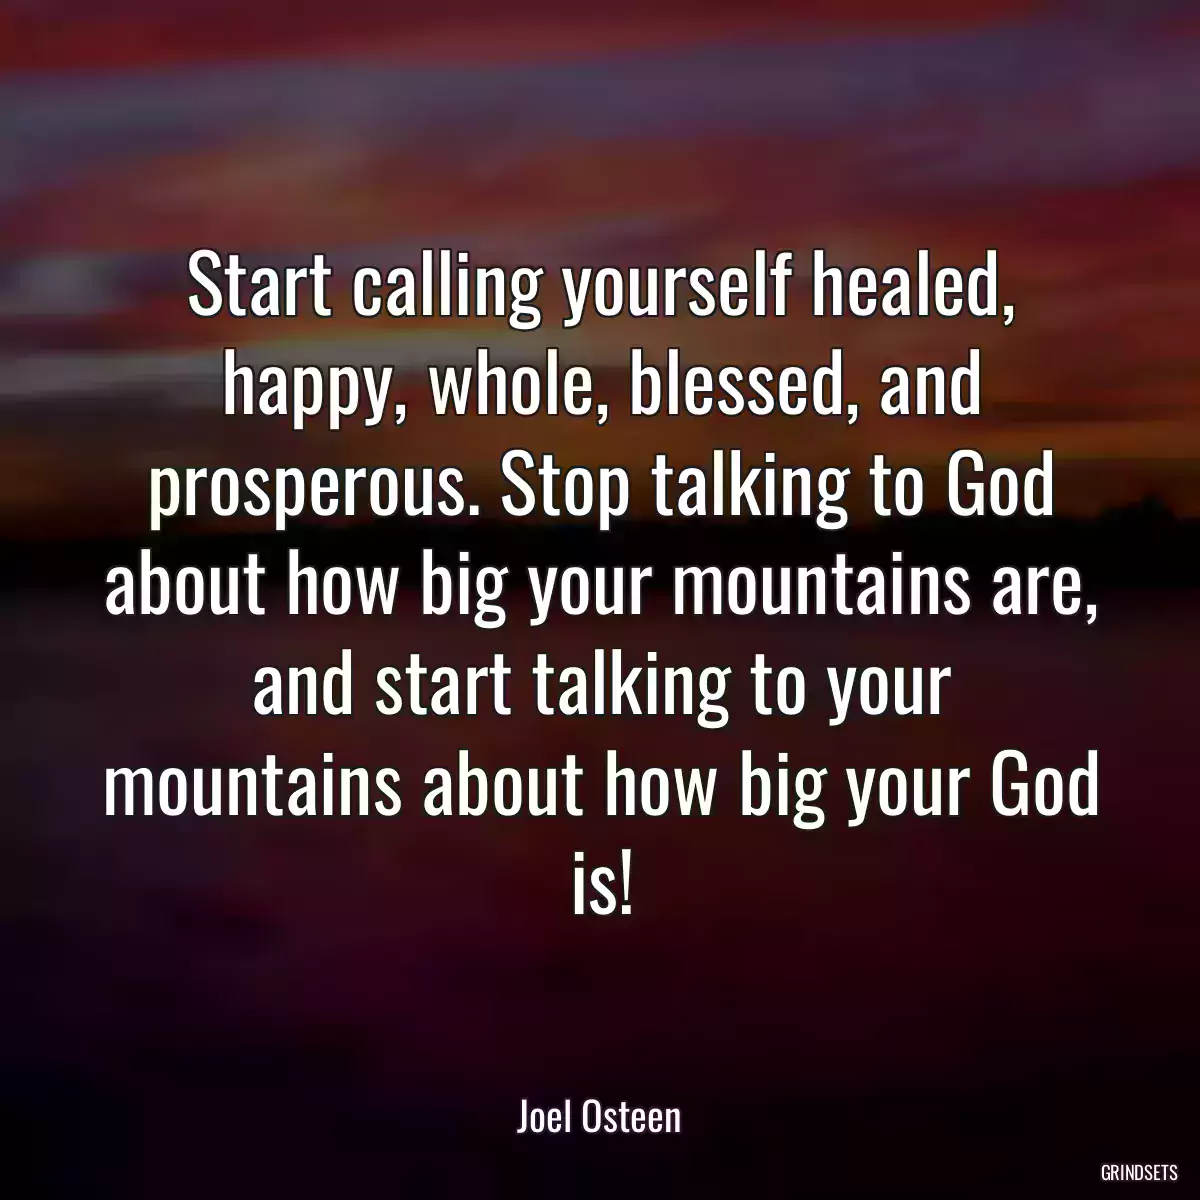 Start calling yourself healed, happy, whole, blessed, and prosperous. Stop talking to God about how big your mountains are, and start talking to your mountains about how big your God is!